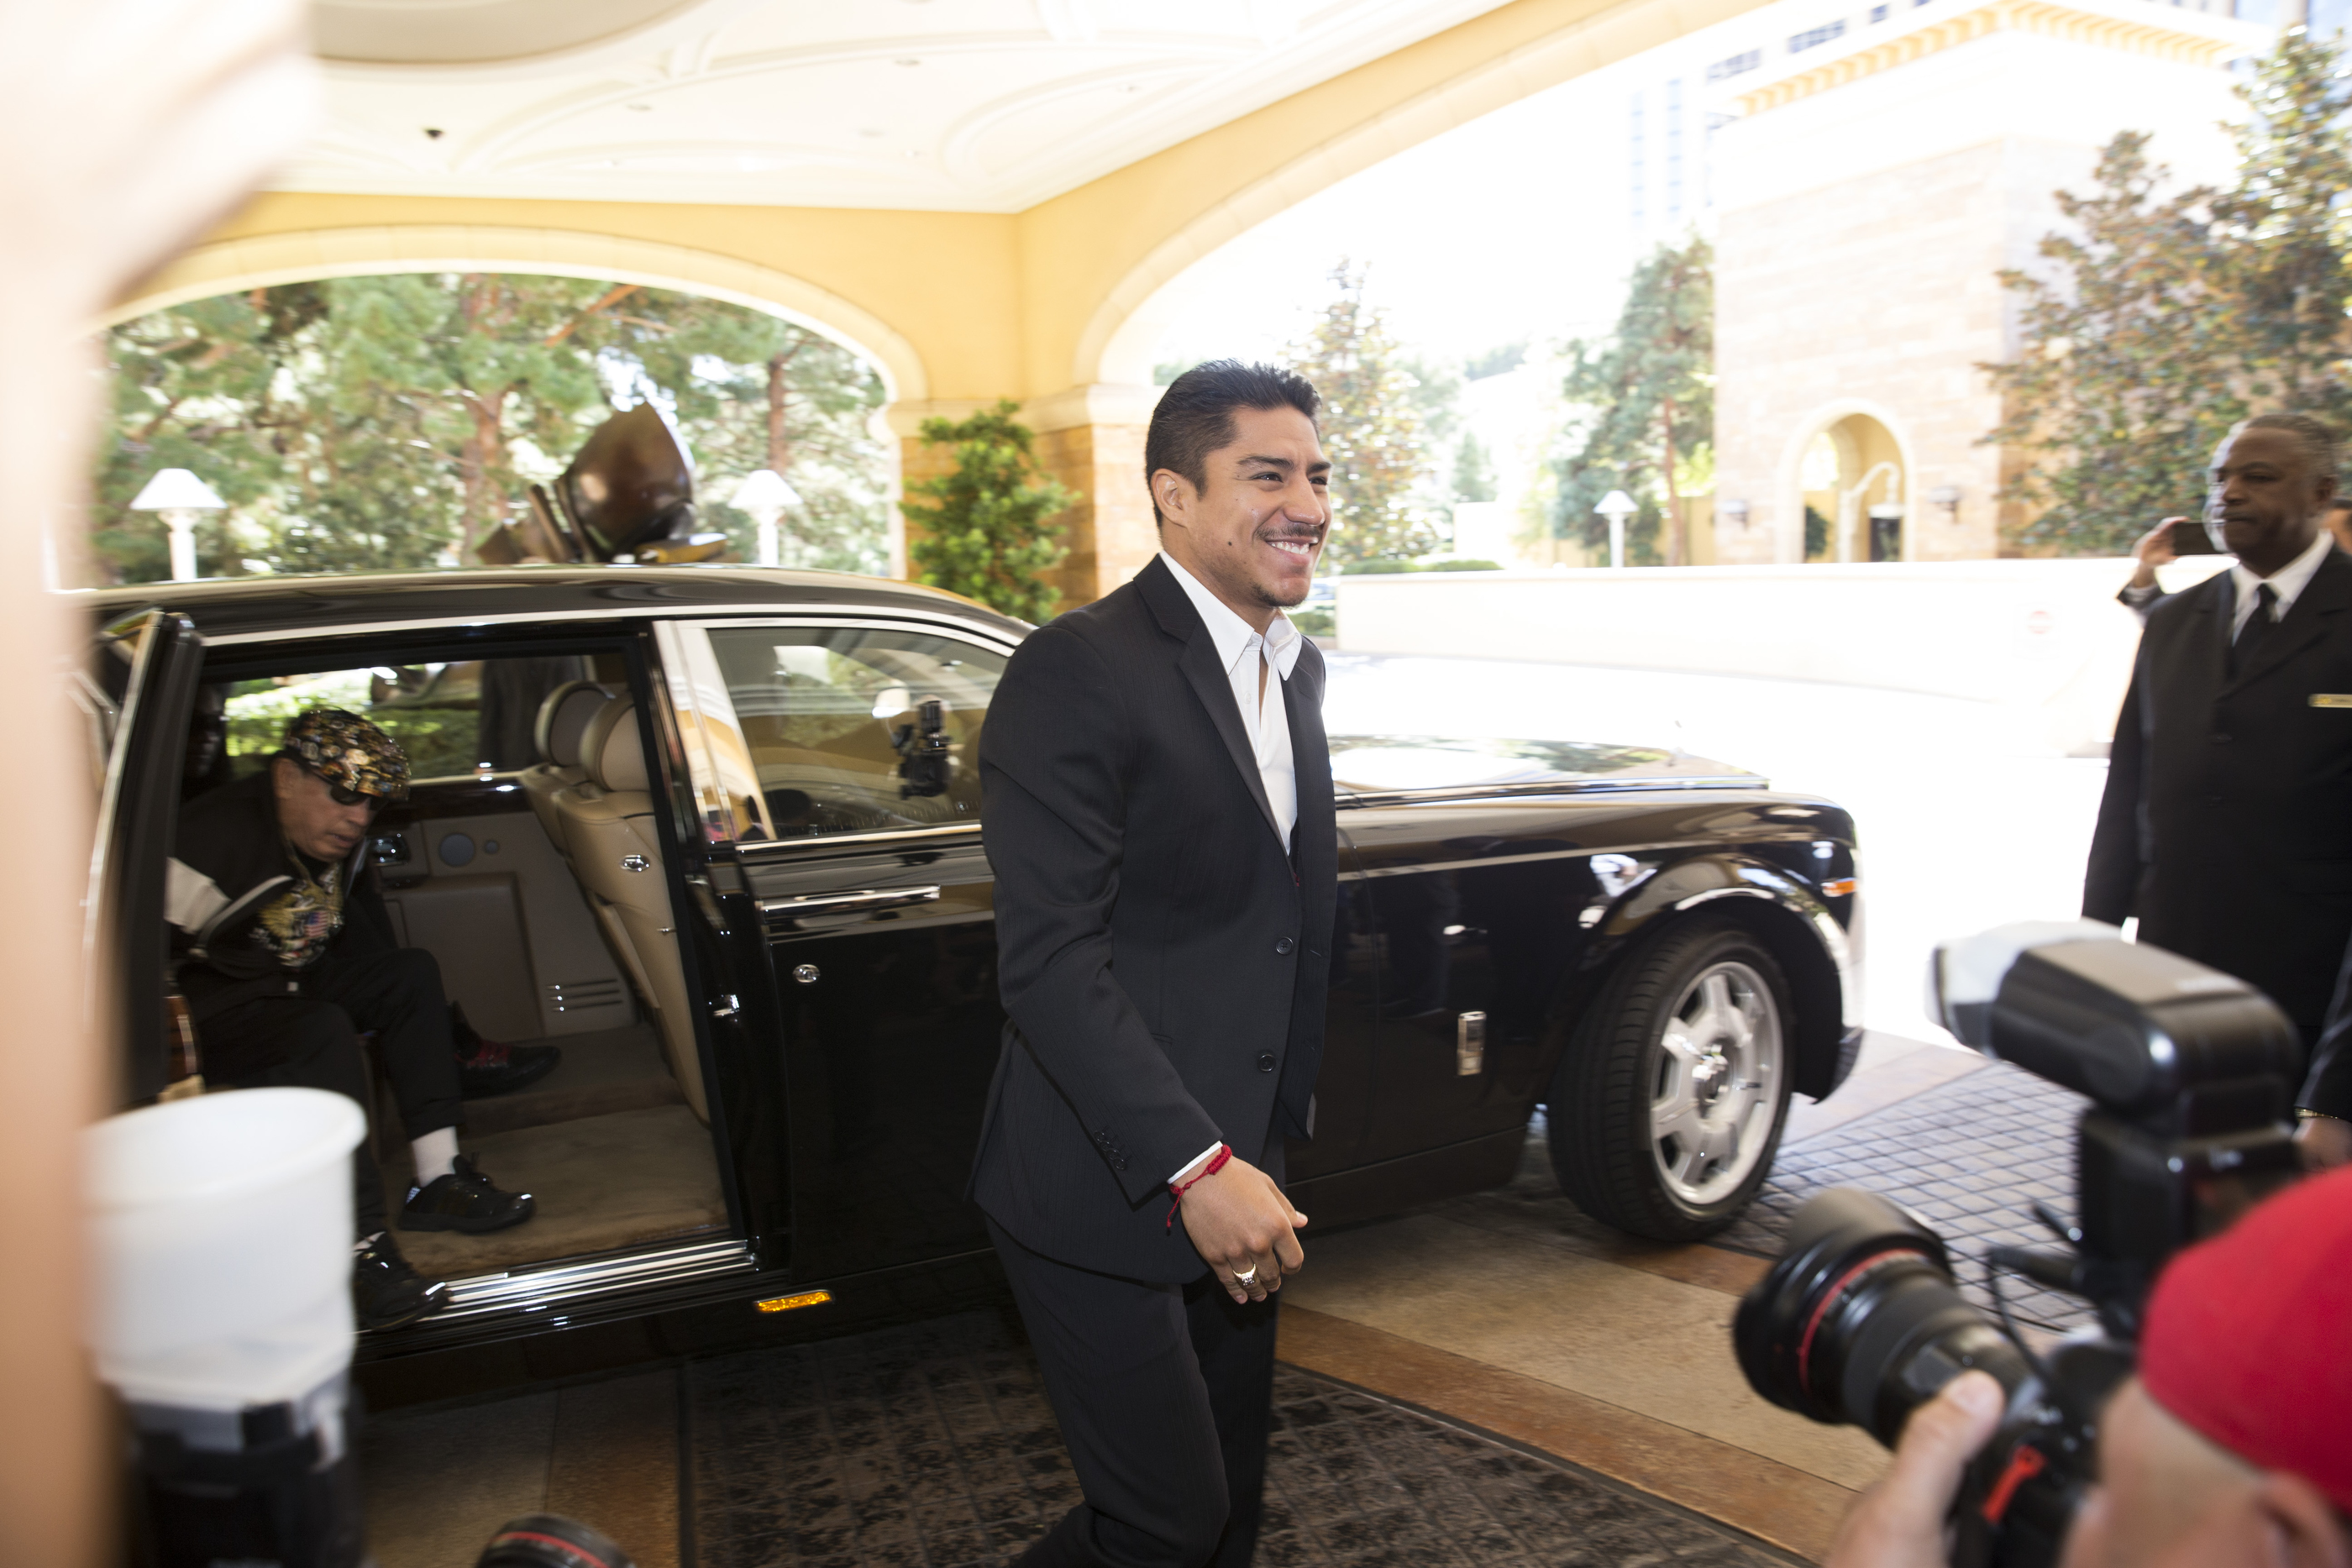 Boxer Jessie Vargas makes his "Grand Arrival" to the Wynn hotel-casino on Tuesday, Nov. 1, 2016, in Las Vegas. Vargas is scheduled to fight Manny Pacquiao  on Saturday night at the Thomas & Mack Center. (Erik Verduzco/Las Vegas Review-Journal via AP)